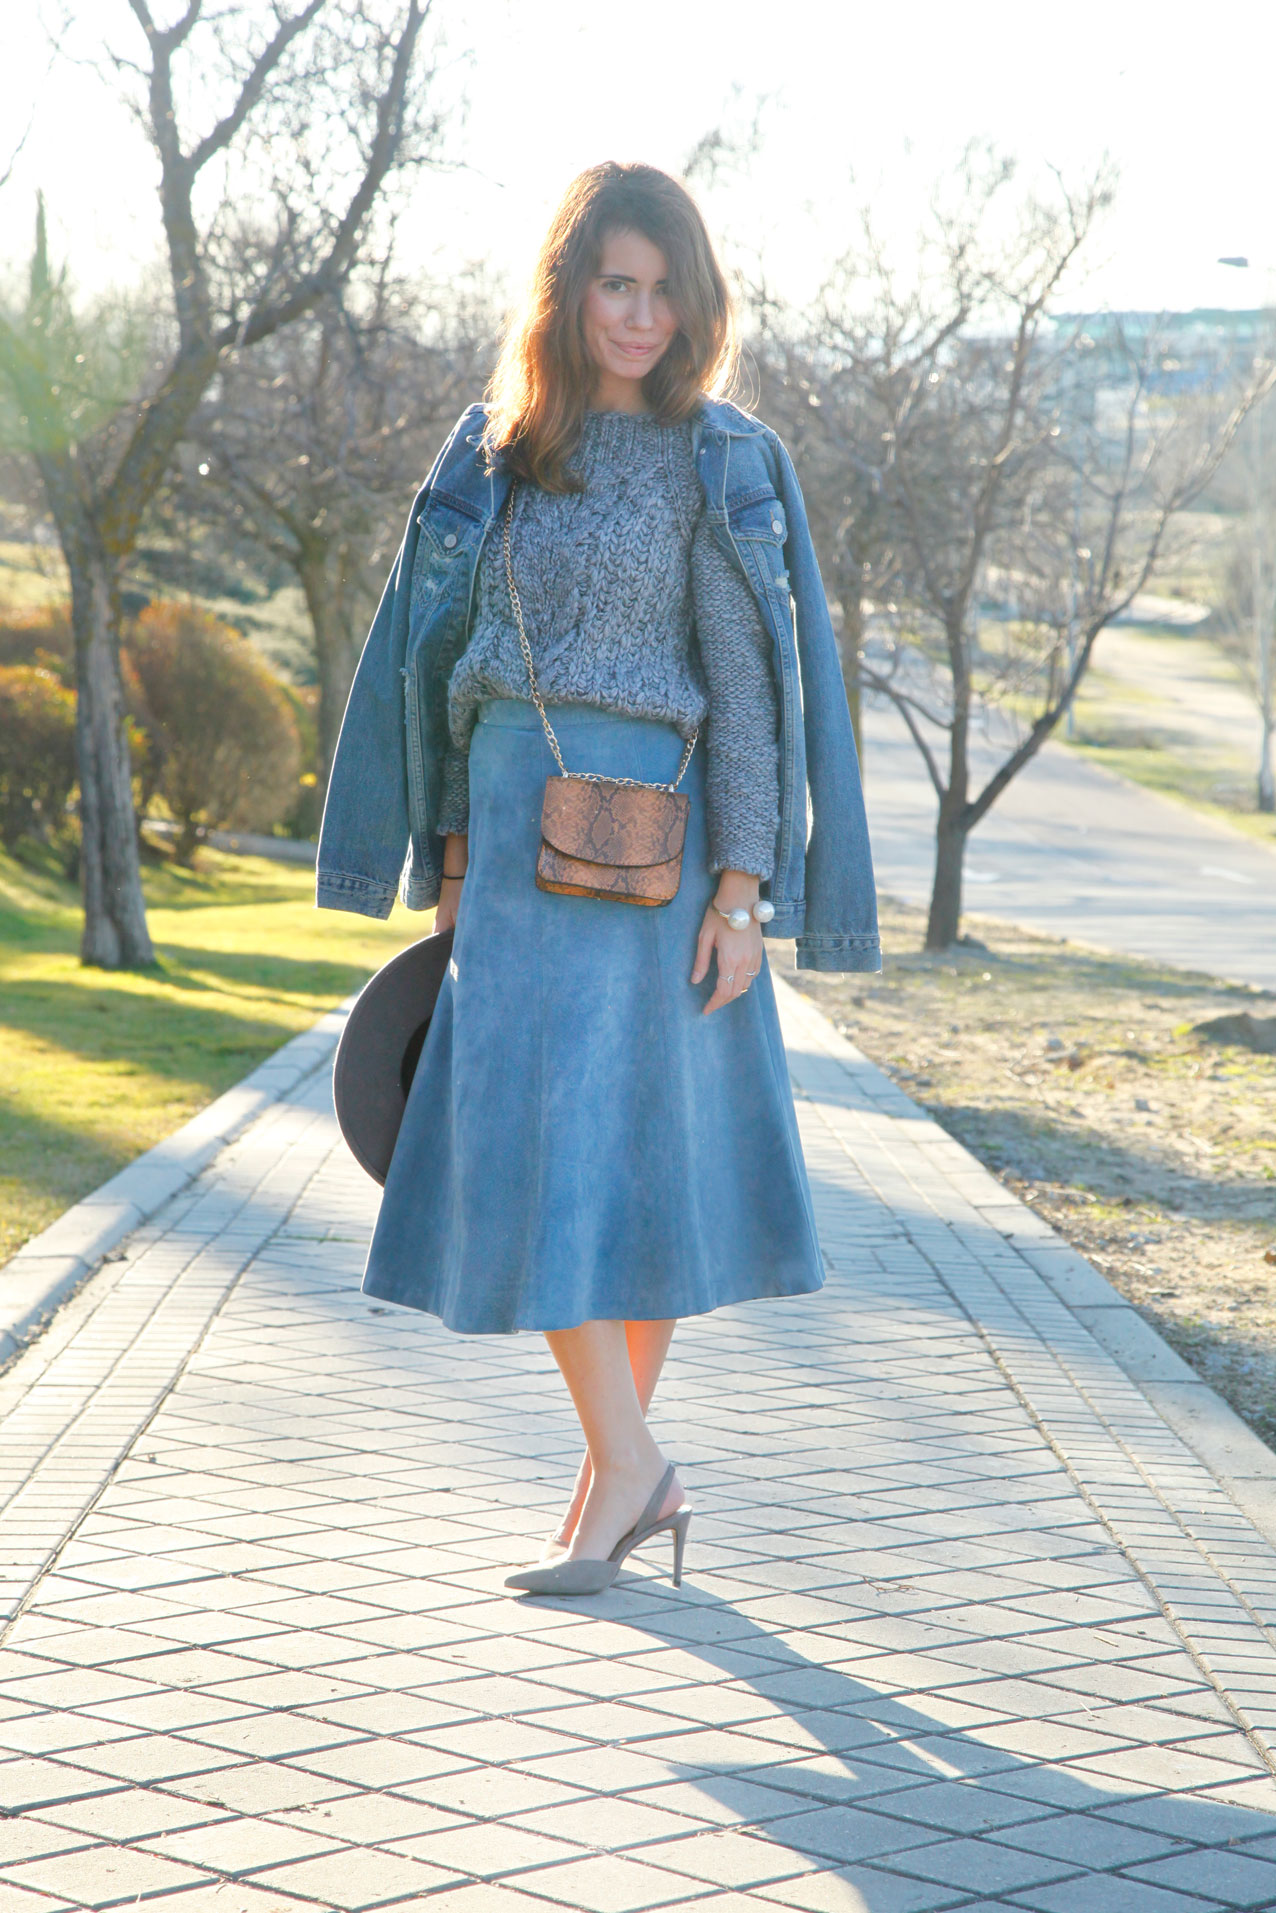 serenity_look-suede_skirt-polinetmoi-asos-grey_and_baby_blue_streetstyle_outfit_boho-cool_lemonade